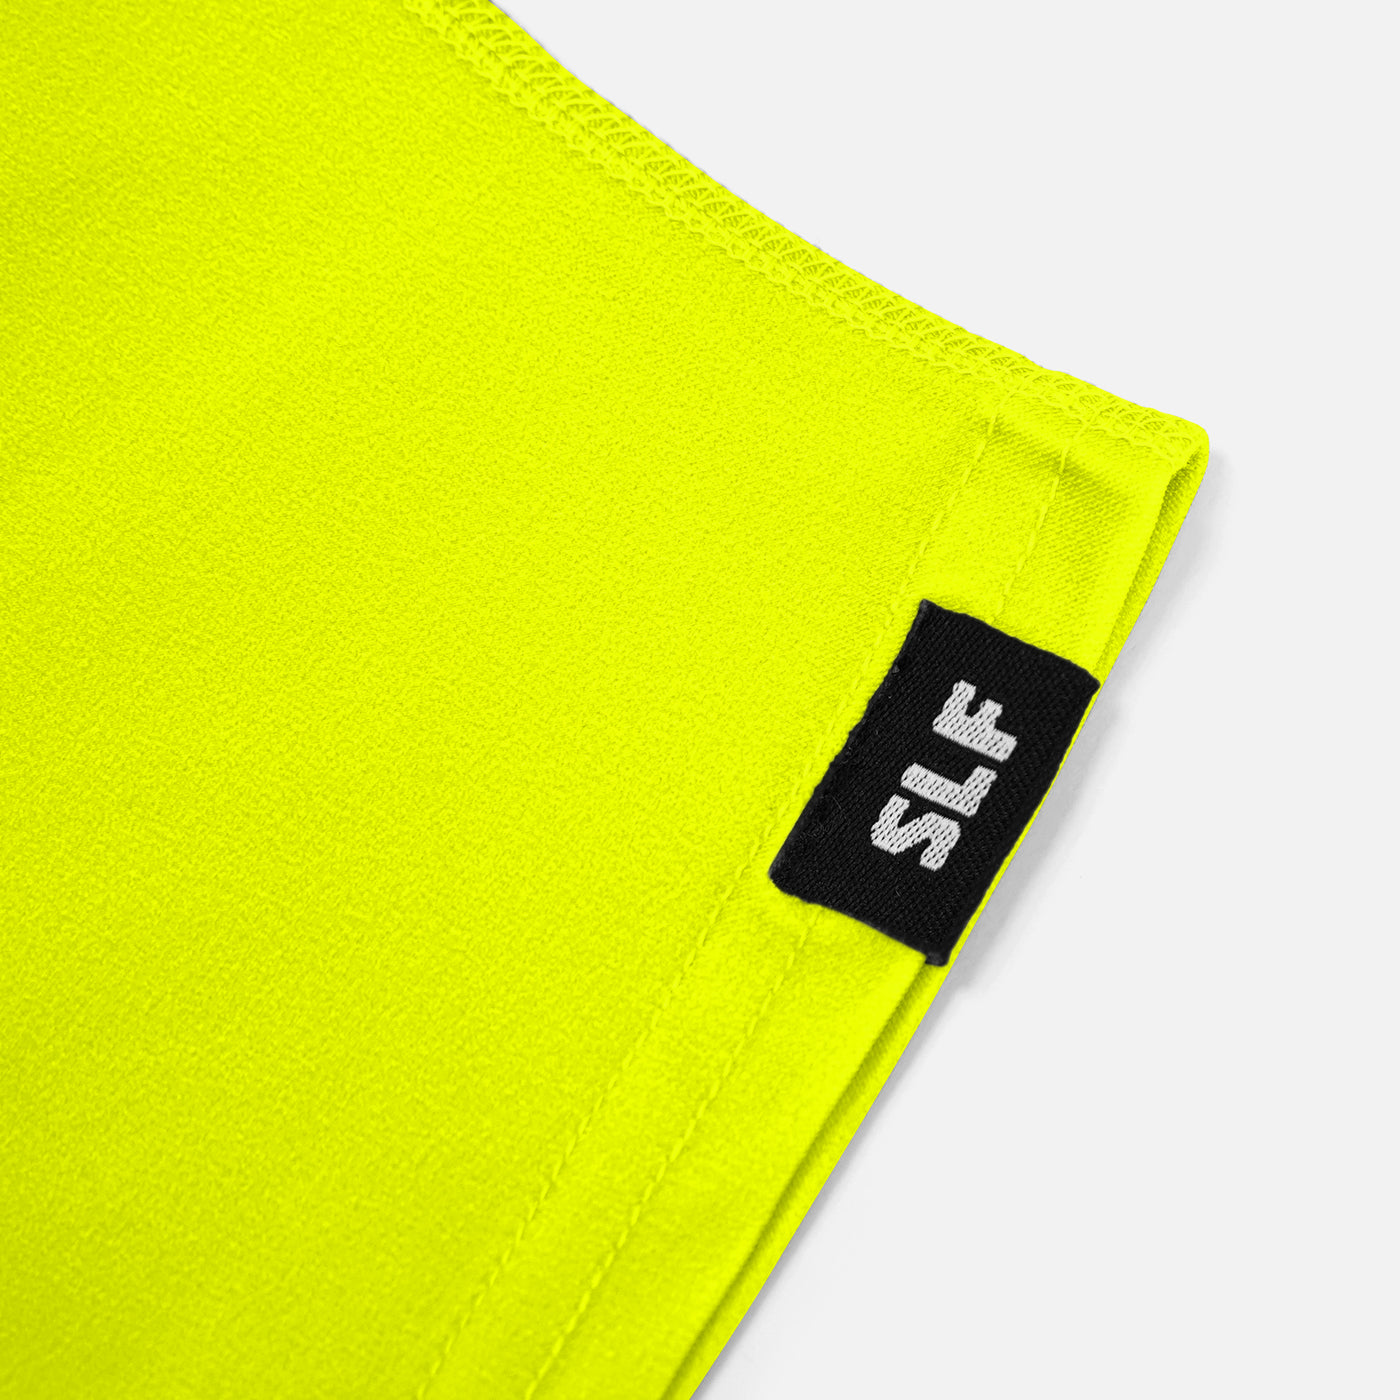 Safety Yellow Kids Spats / Cleat Covers